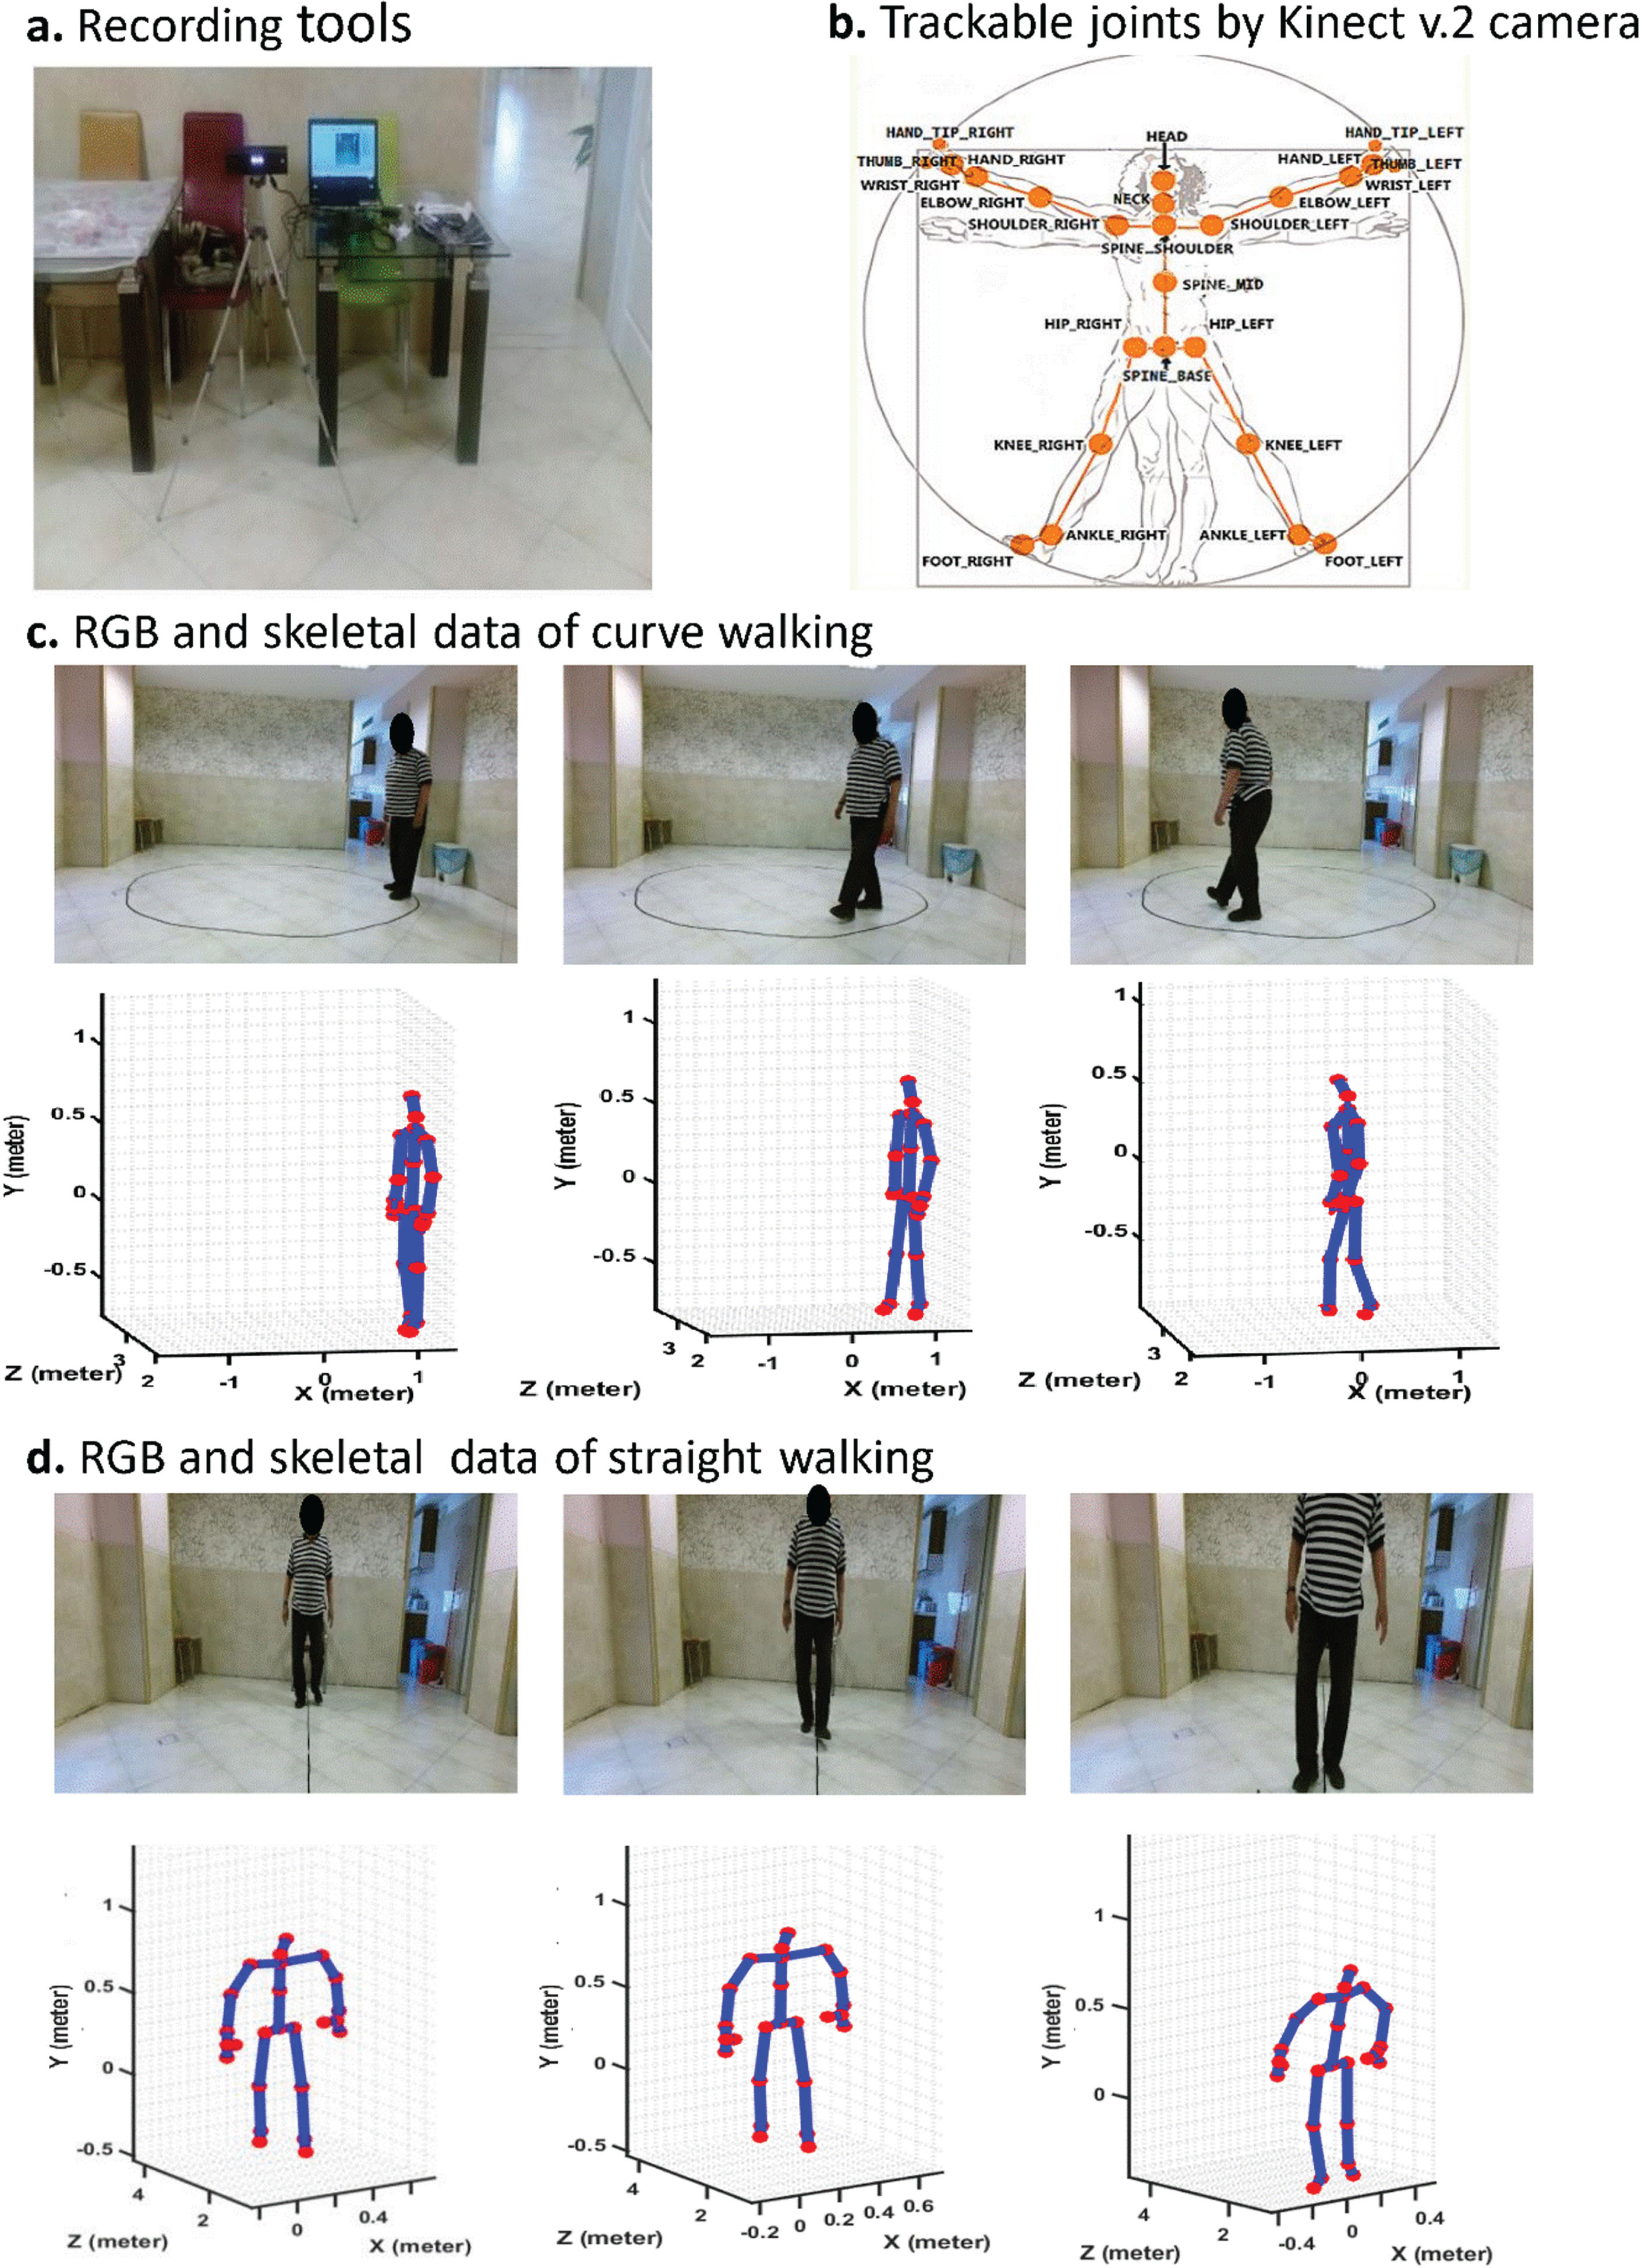 a. Recording tools and setup, b. Map of joints can be tracked by Kinect v.2 camera, c. a participant performing curve walking beside Kinect v.2 records movement signals from 25 body joints, and d. Performing straight walking and recorded signals of his body joints in the form of skeleton by Kinect v.2 camera.